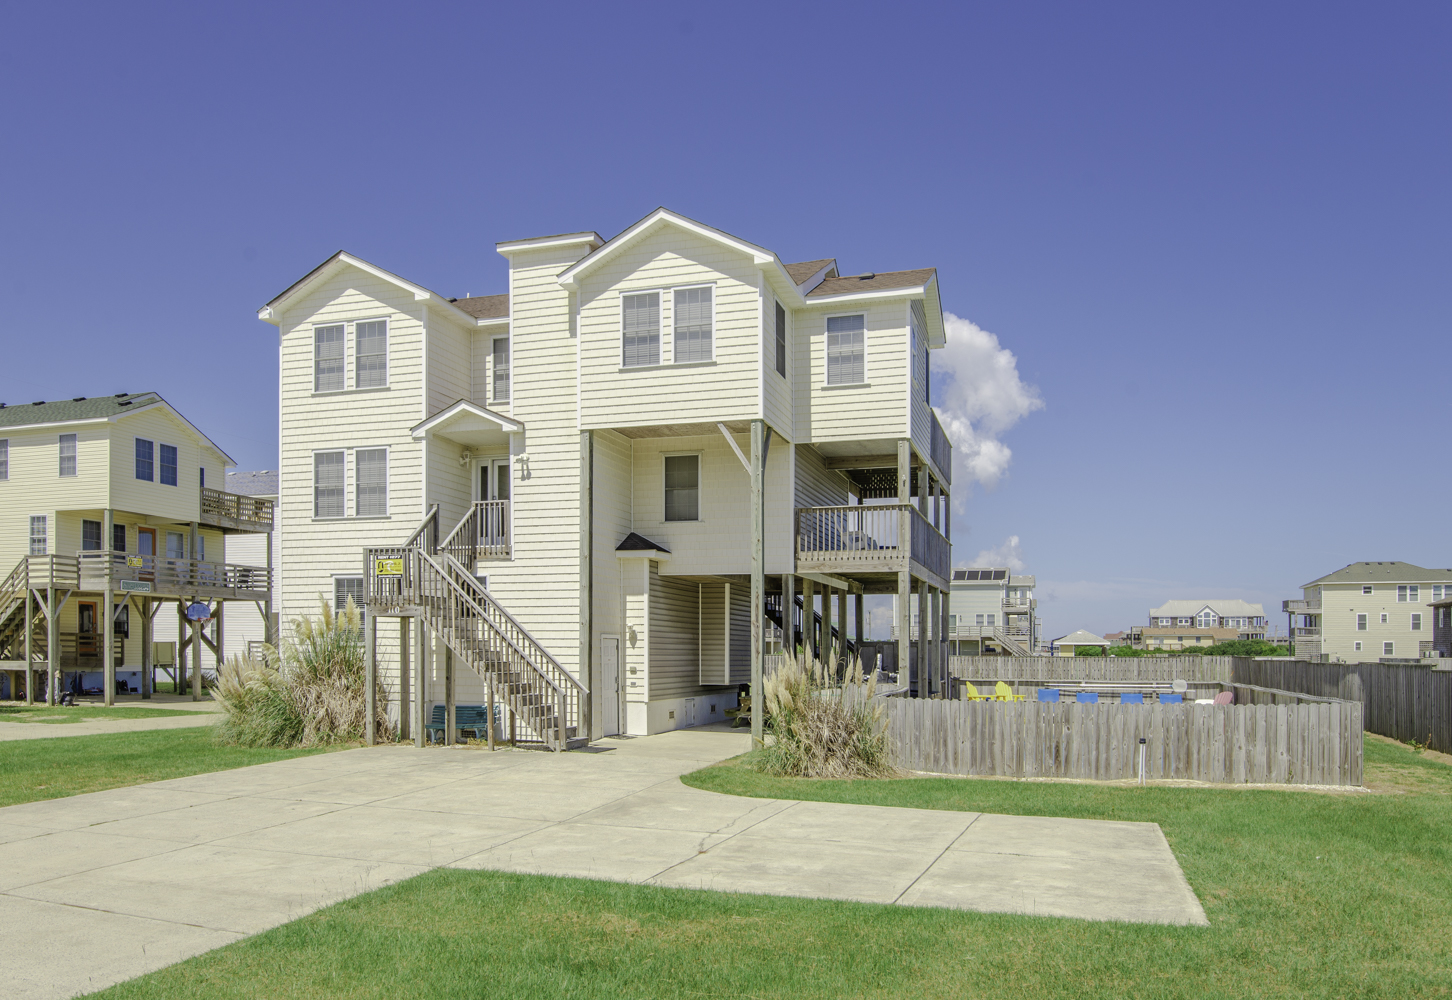 277 The Cheeky Kea Outer Banks Vacation Rental In Nags Head